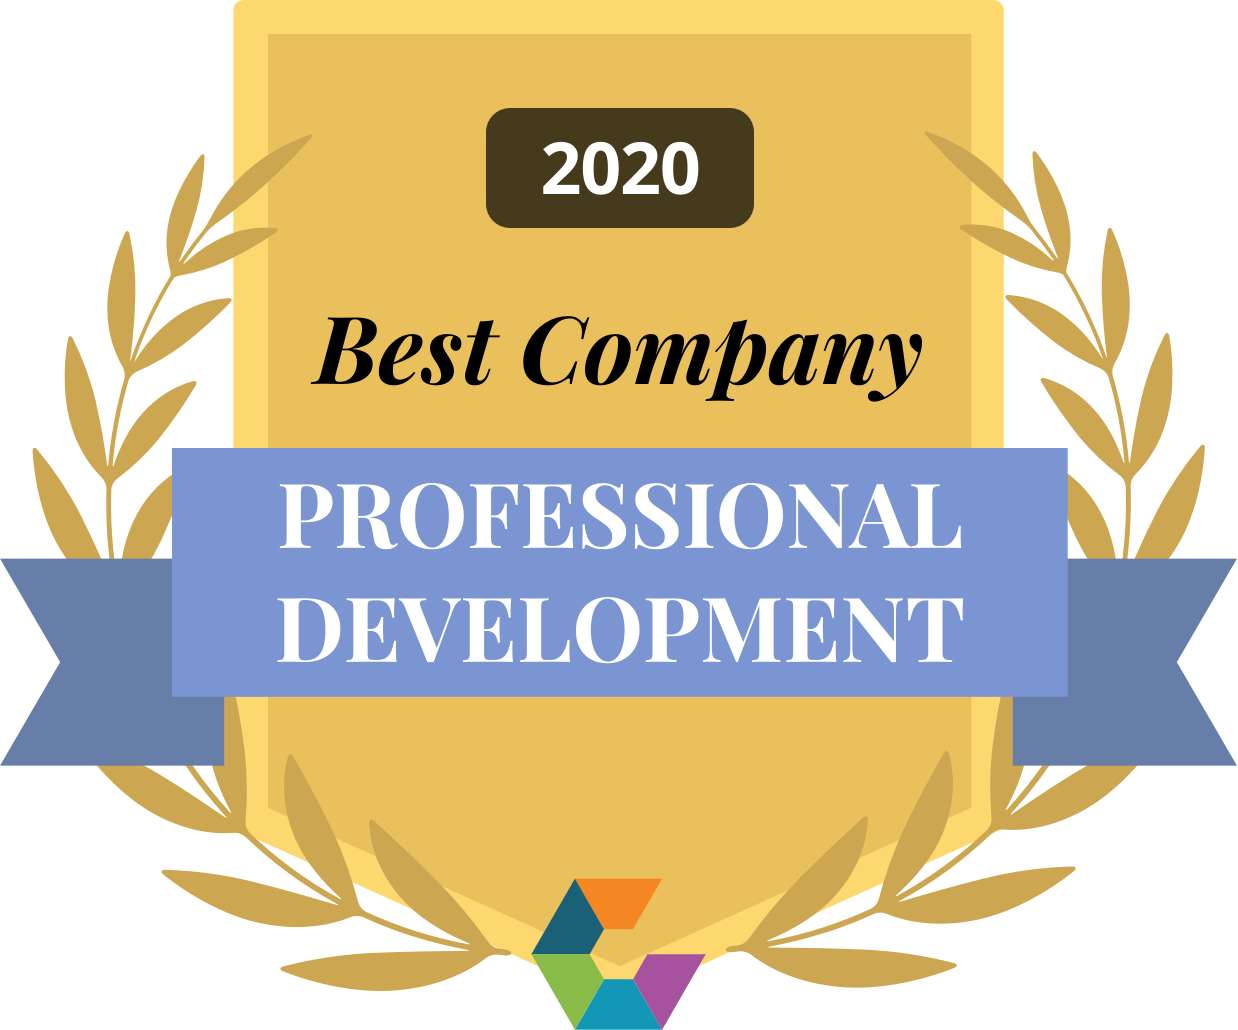 Gopuff 2020 Comparably award for best professional development